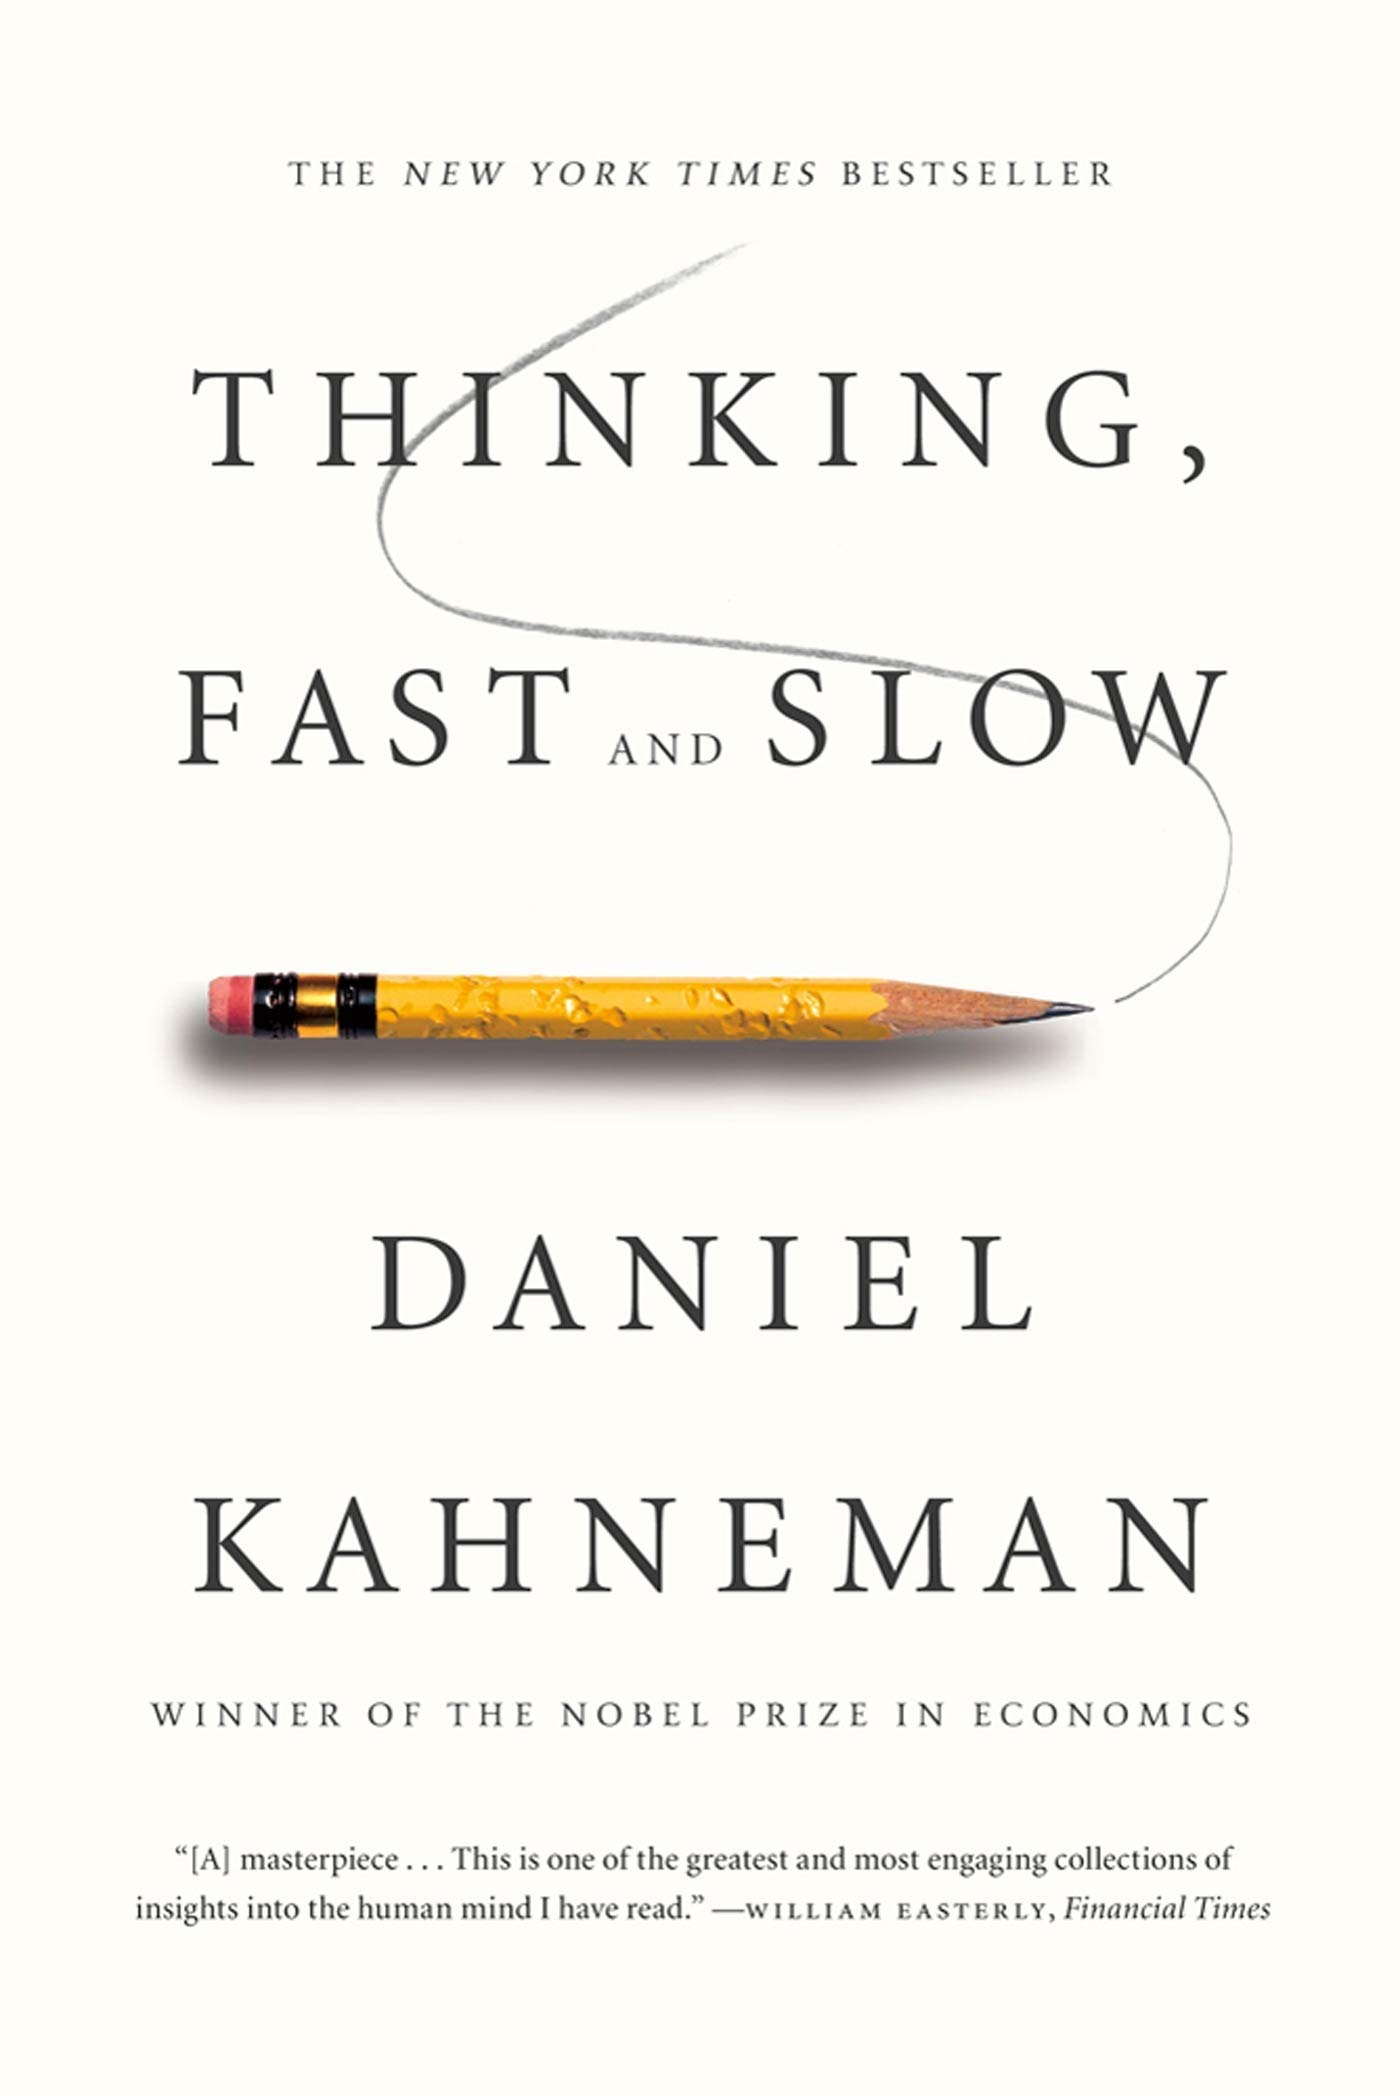 Kahneman's book, Thinking, Fast and Slow, summarizes a large body of work covering two distinct cognitive modes and systems. System 1 (unconscious, implicit, fast) and System 2 (conscious, explicit, slow) are the same memory systems that underlie music preference. 